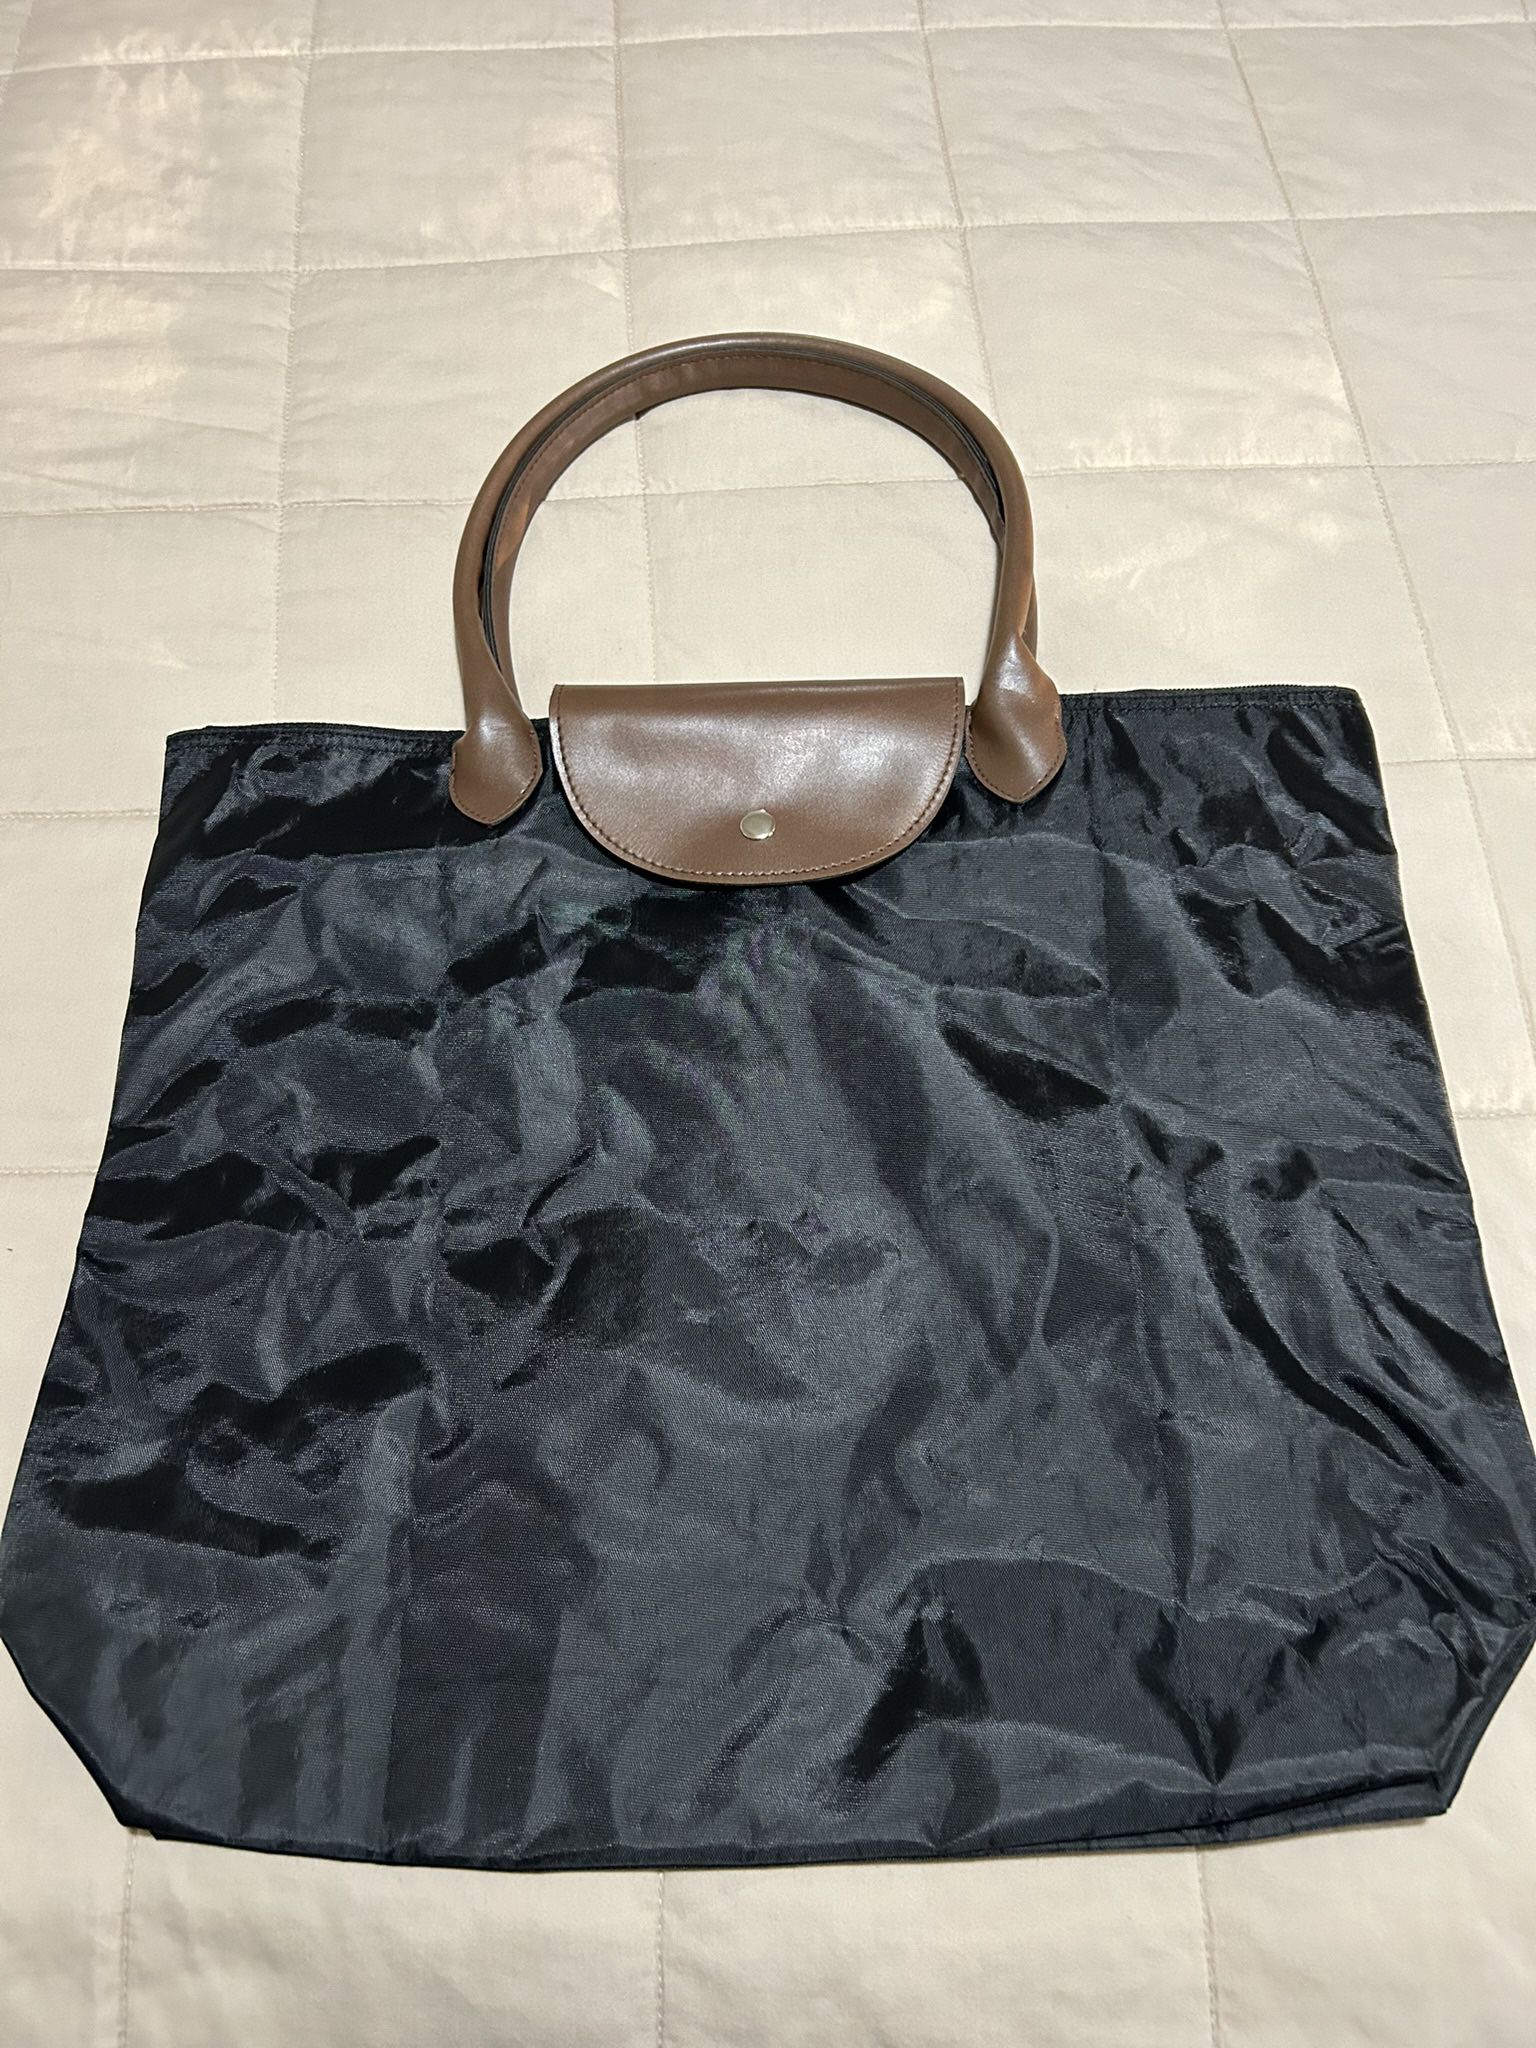 New/Never Used Shopping Bag